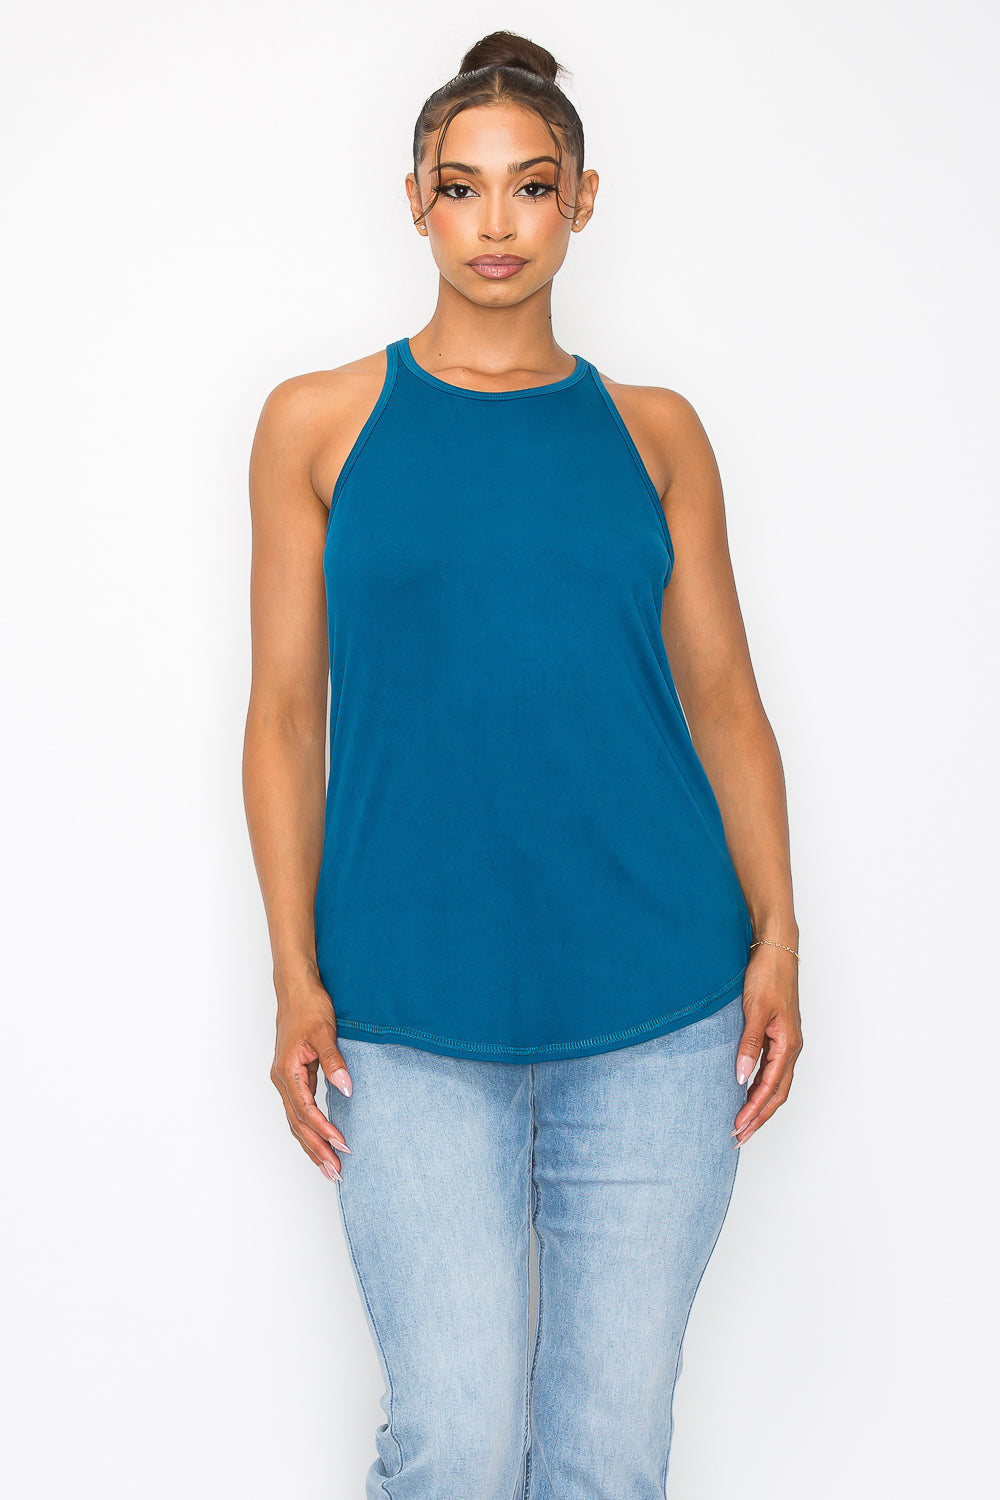 Strappy Y Back Tank Top - Teal